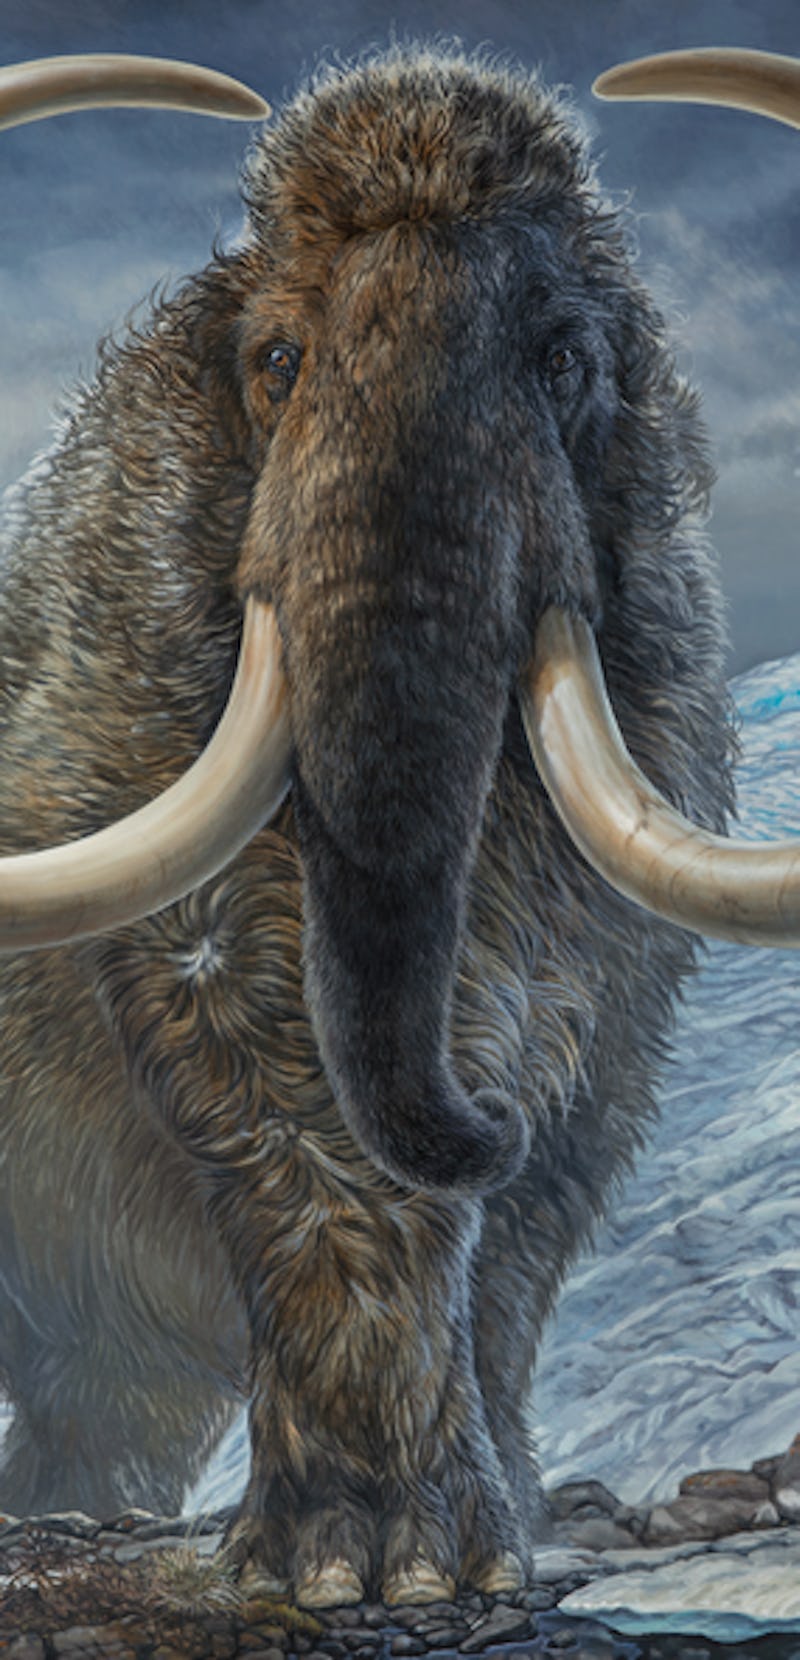 A painting of a woolly mammoth